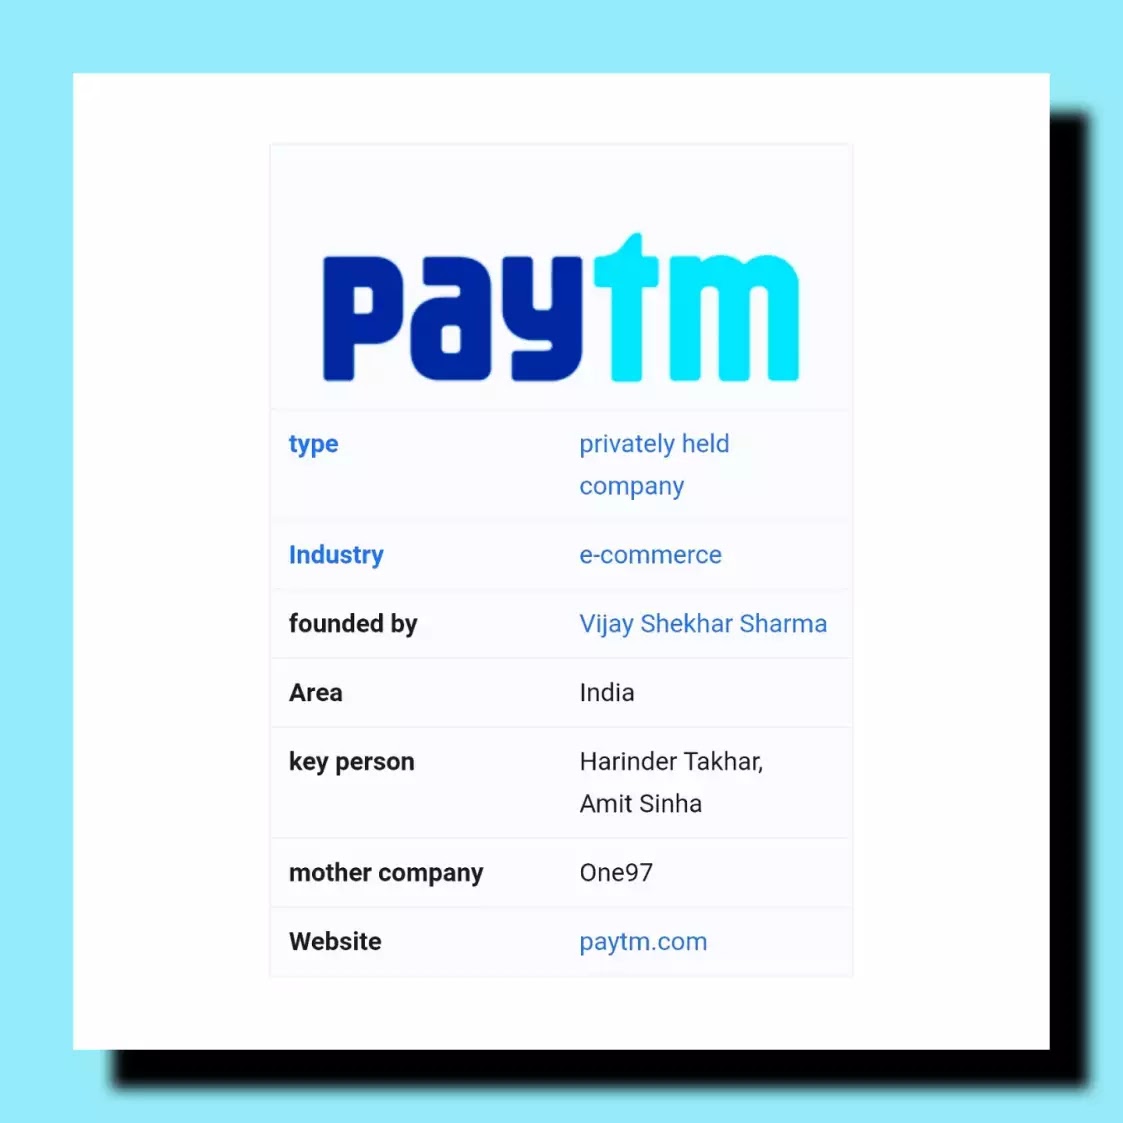 About Paytm: Indian e-commerce and fintech company